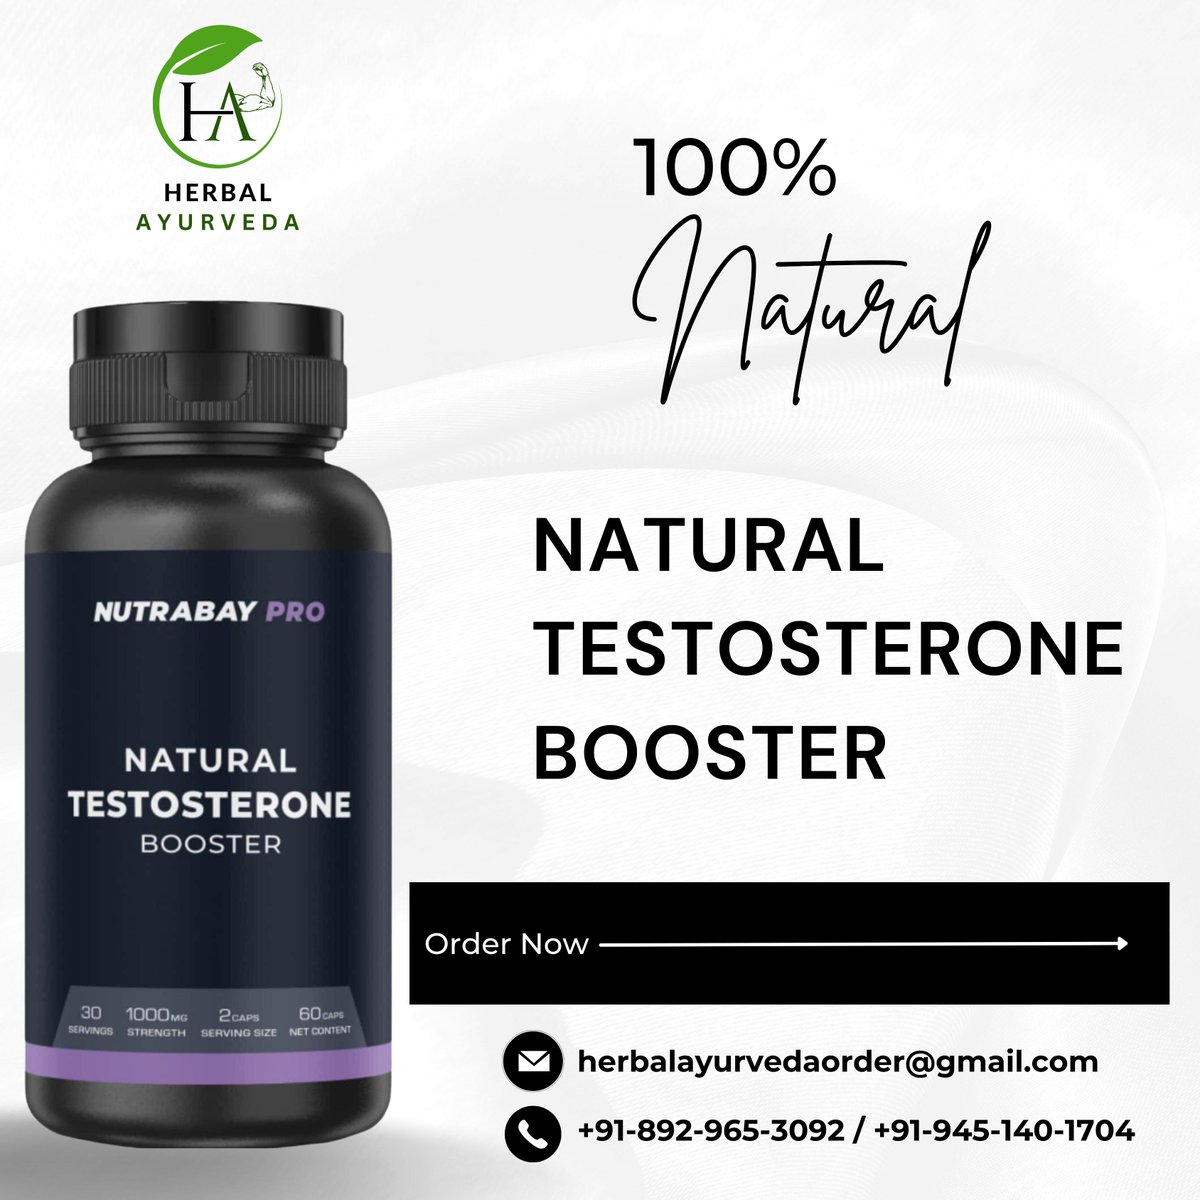 Unlock Your Full Potential: Experience the Power of Our 100% Natural Testosterone Booster!

Buy it. Try it.

#herbalayurveda #herbal #ayurveda #naturalproduct #NaturalTestosteroneBooster #BoostYourPerformance #UnlockYourPotential #MensHealth #NaturalSupplement